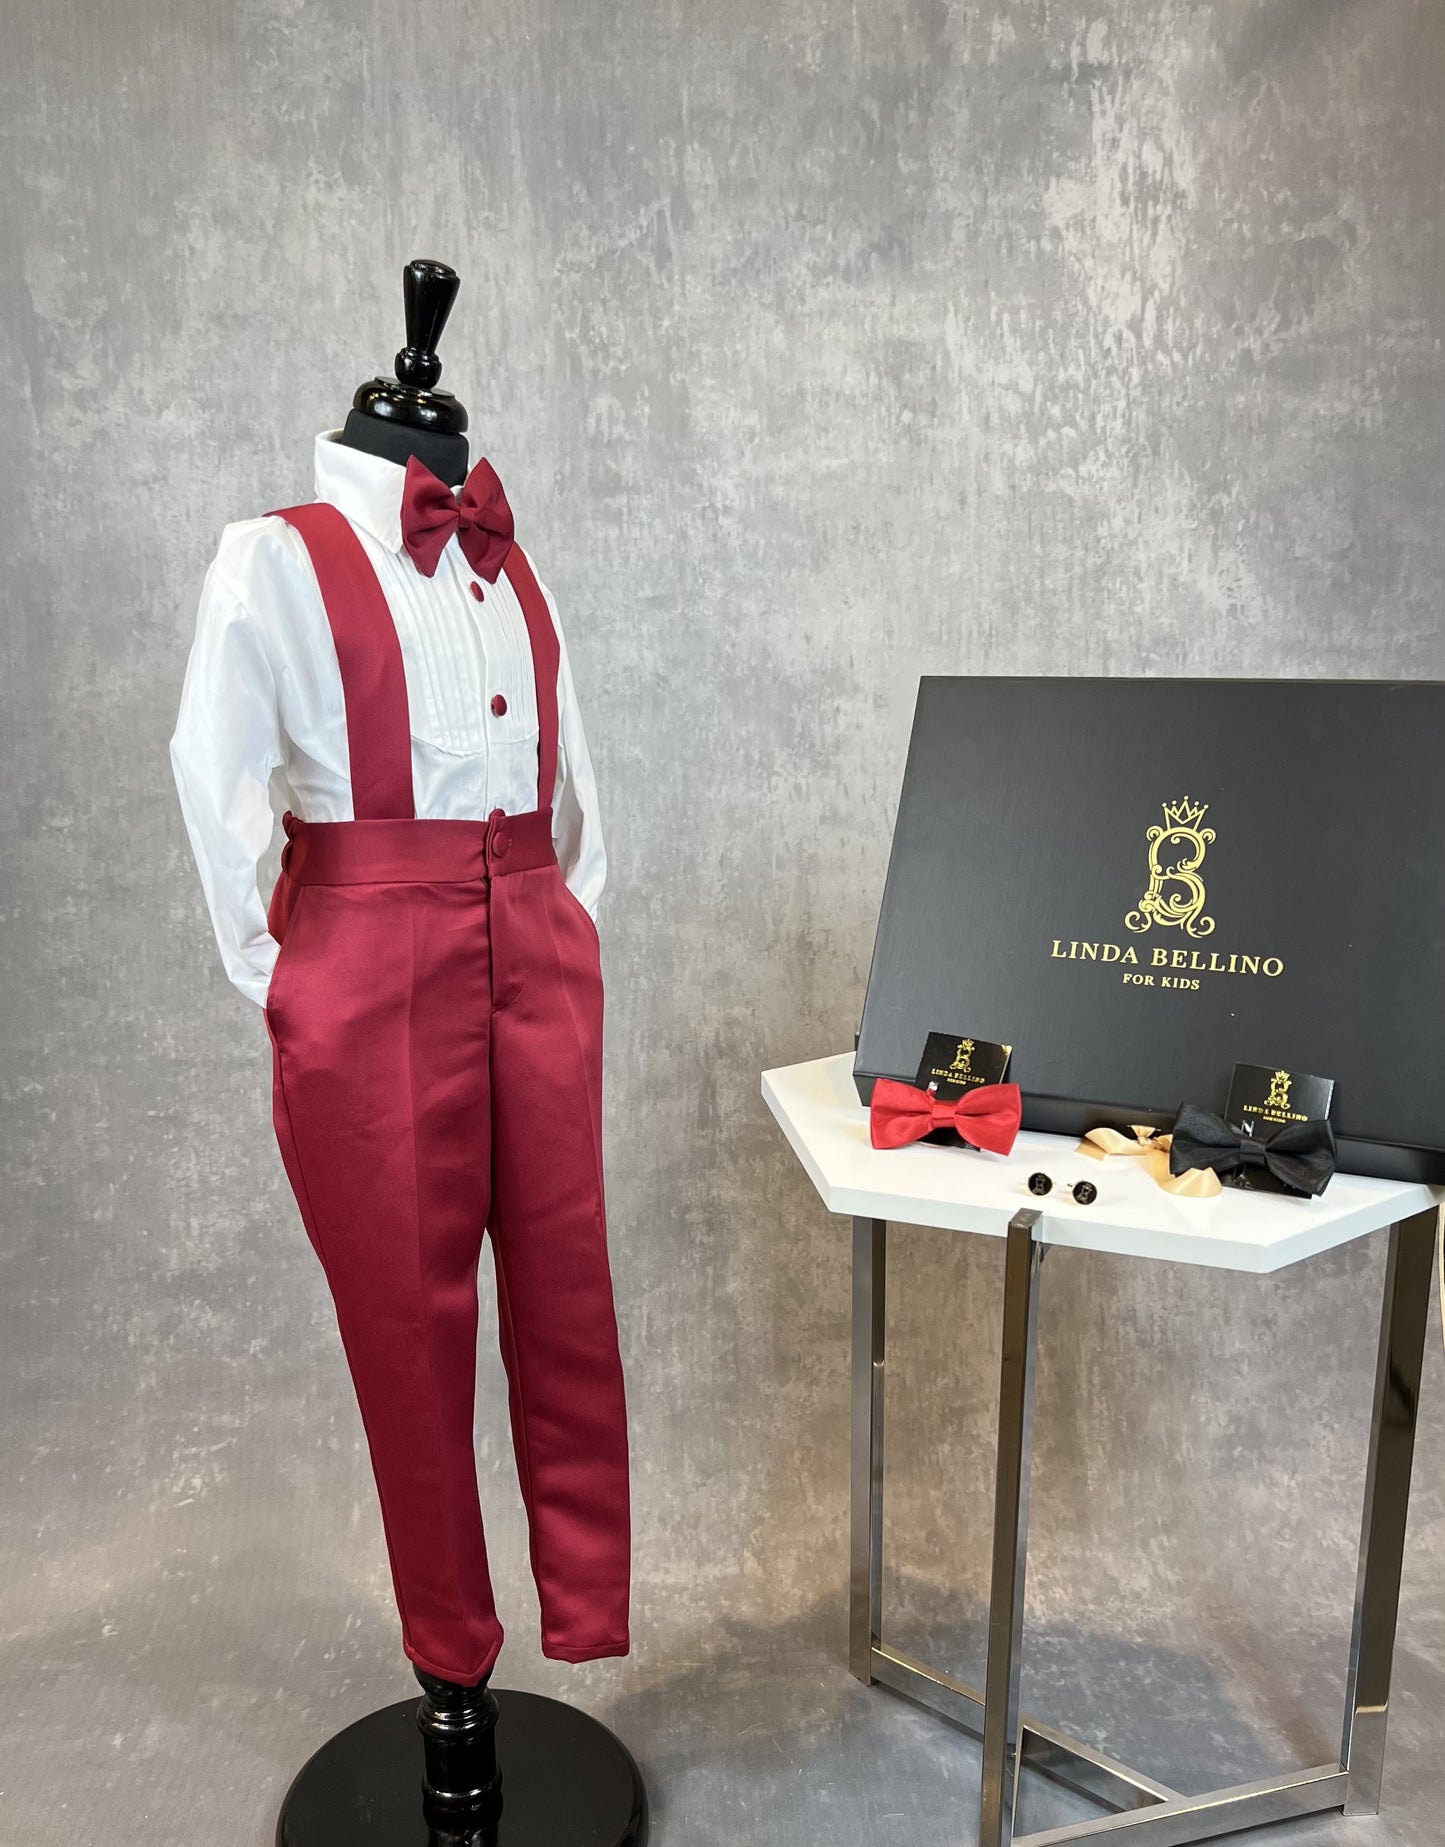 LB Creased Suspender Dress Pants With Matching Bow Tie - Red